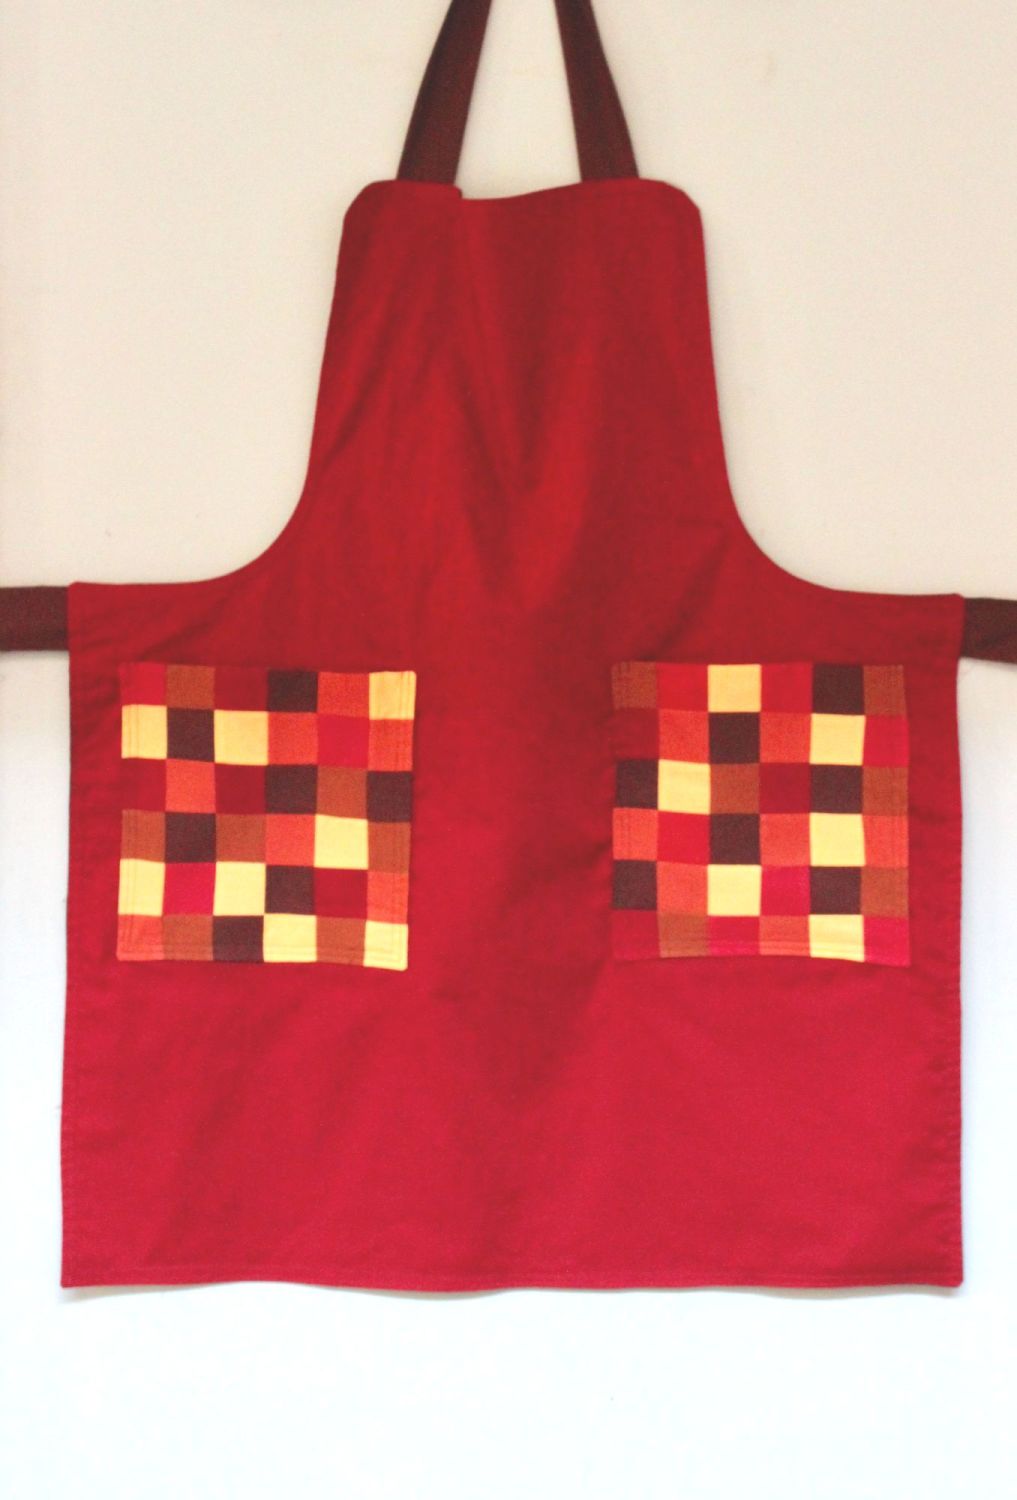 Reversible Apron In Red/Chestnut with Patchwork Pockets